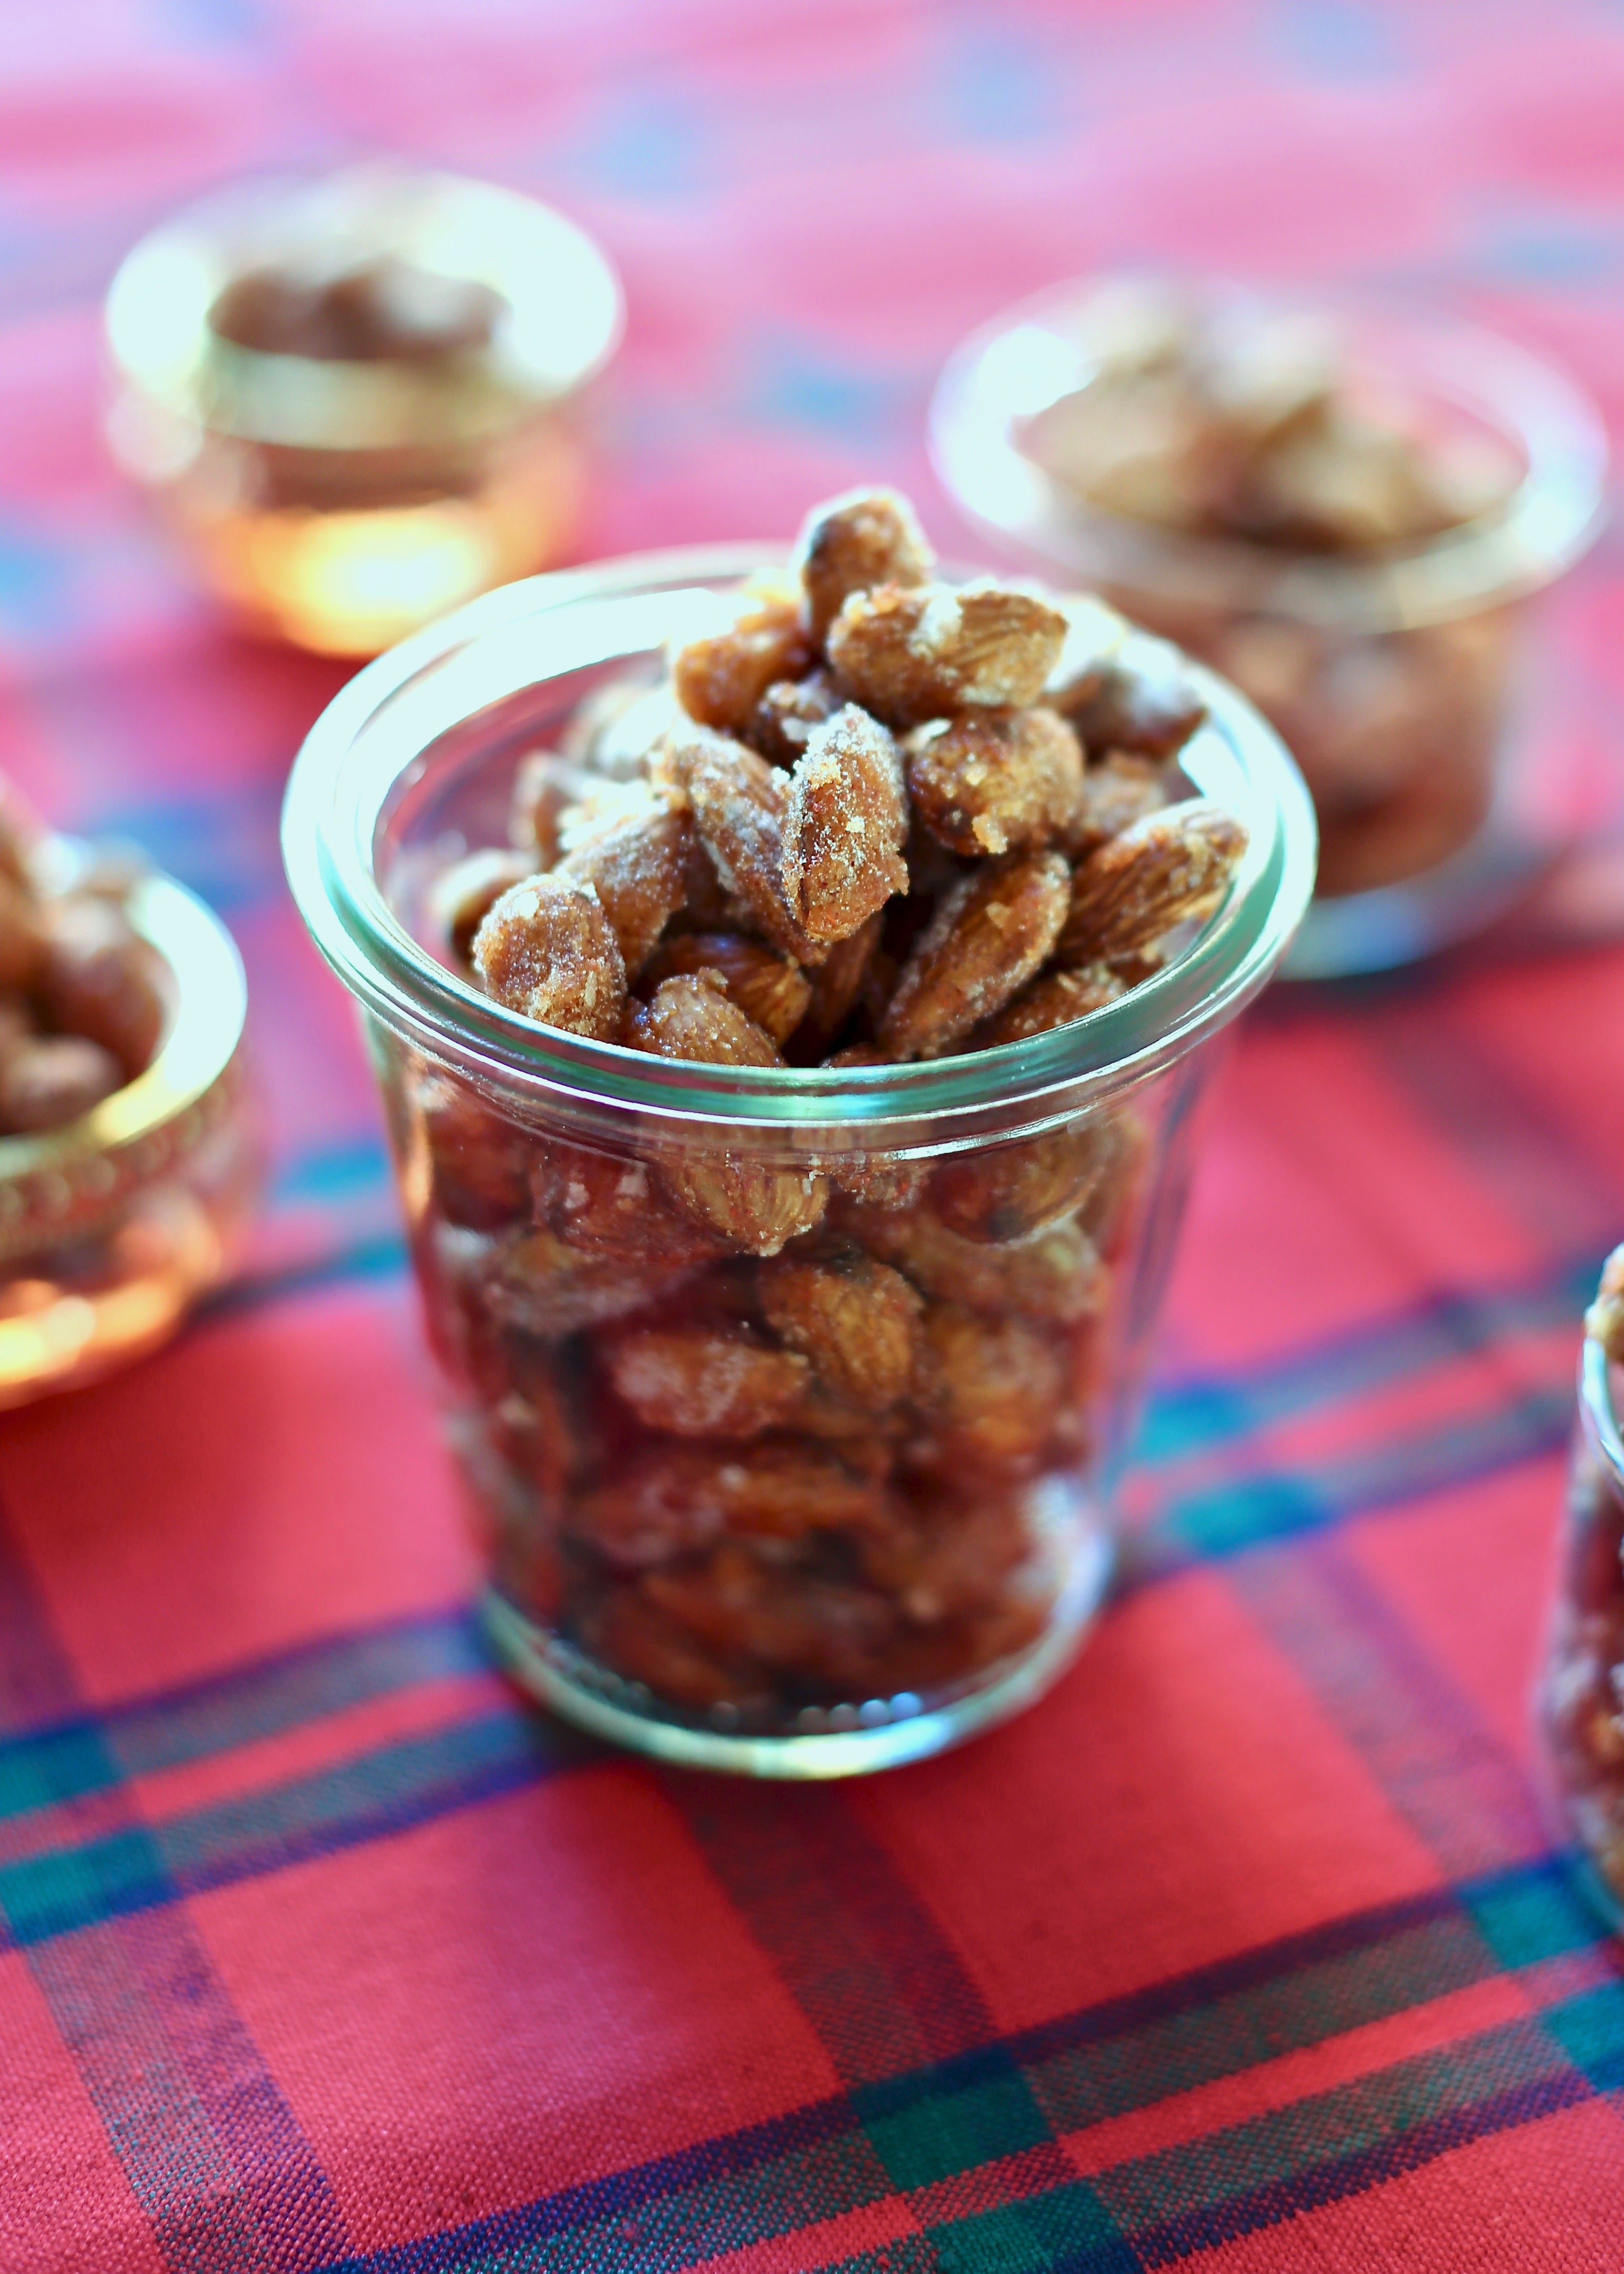 Almonds that are for snacking in a glass jar on a red tablecloth